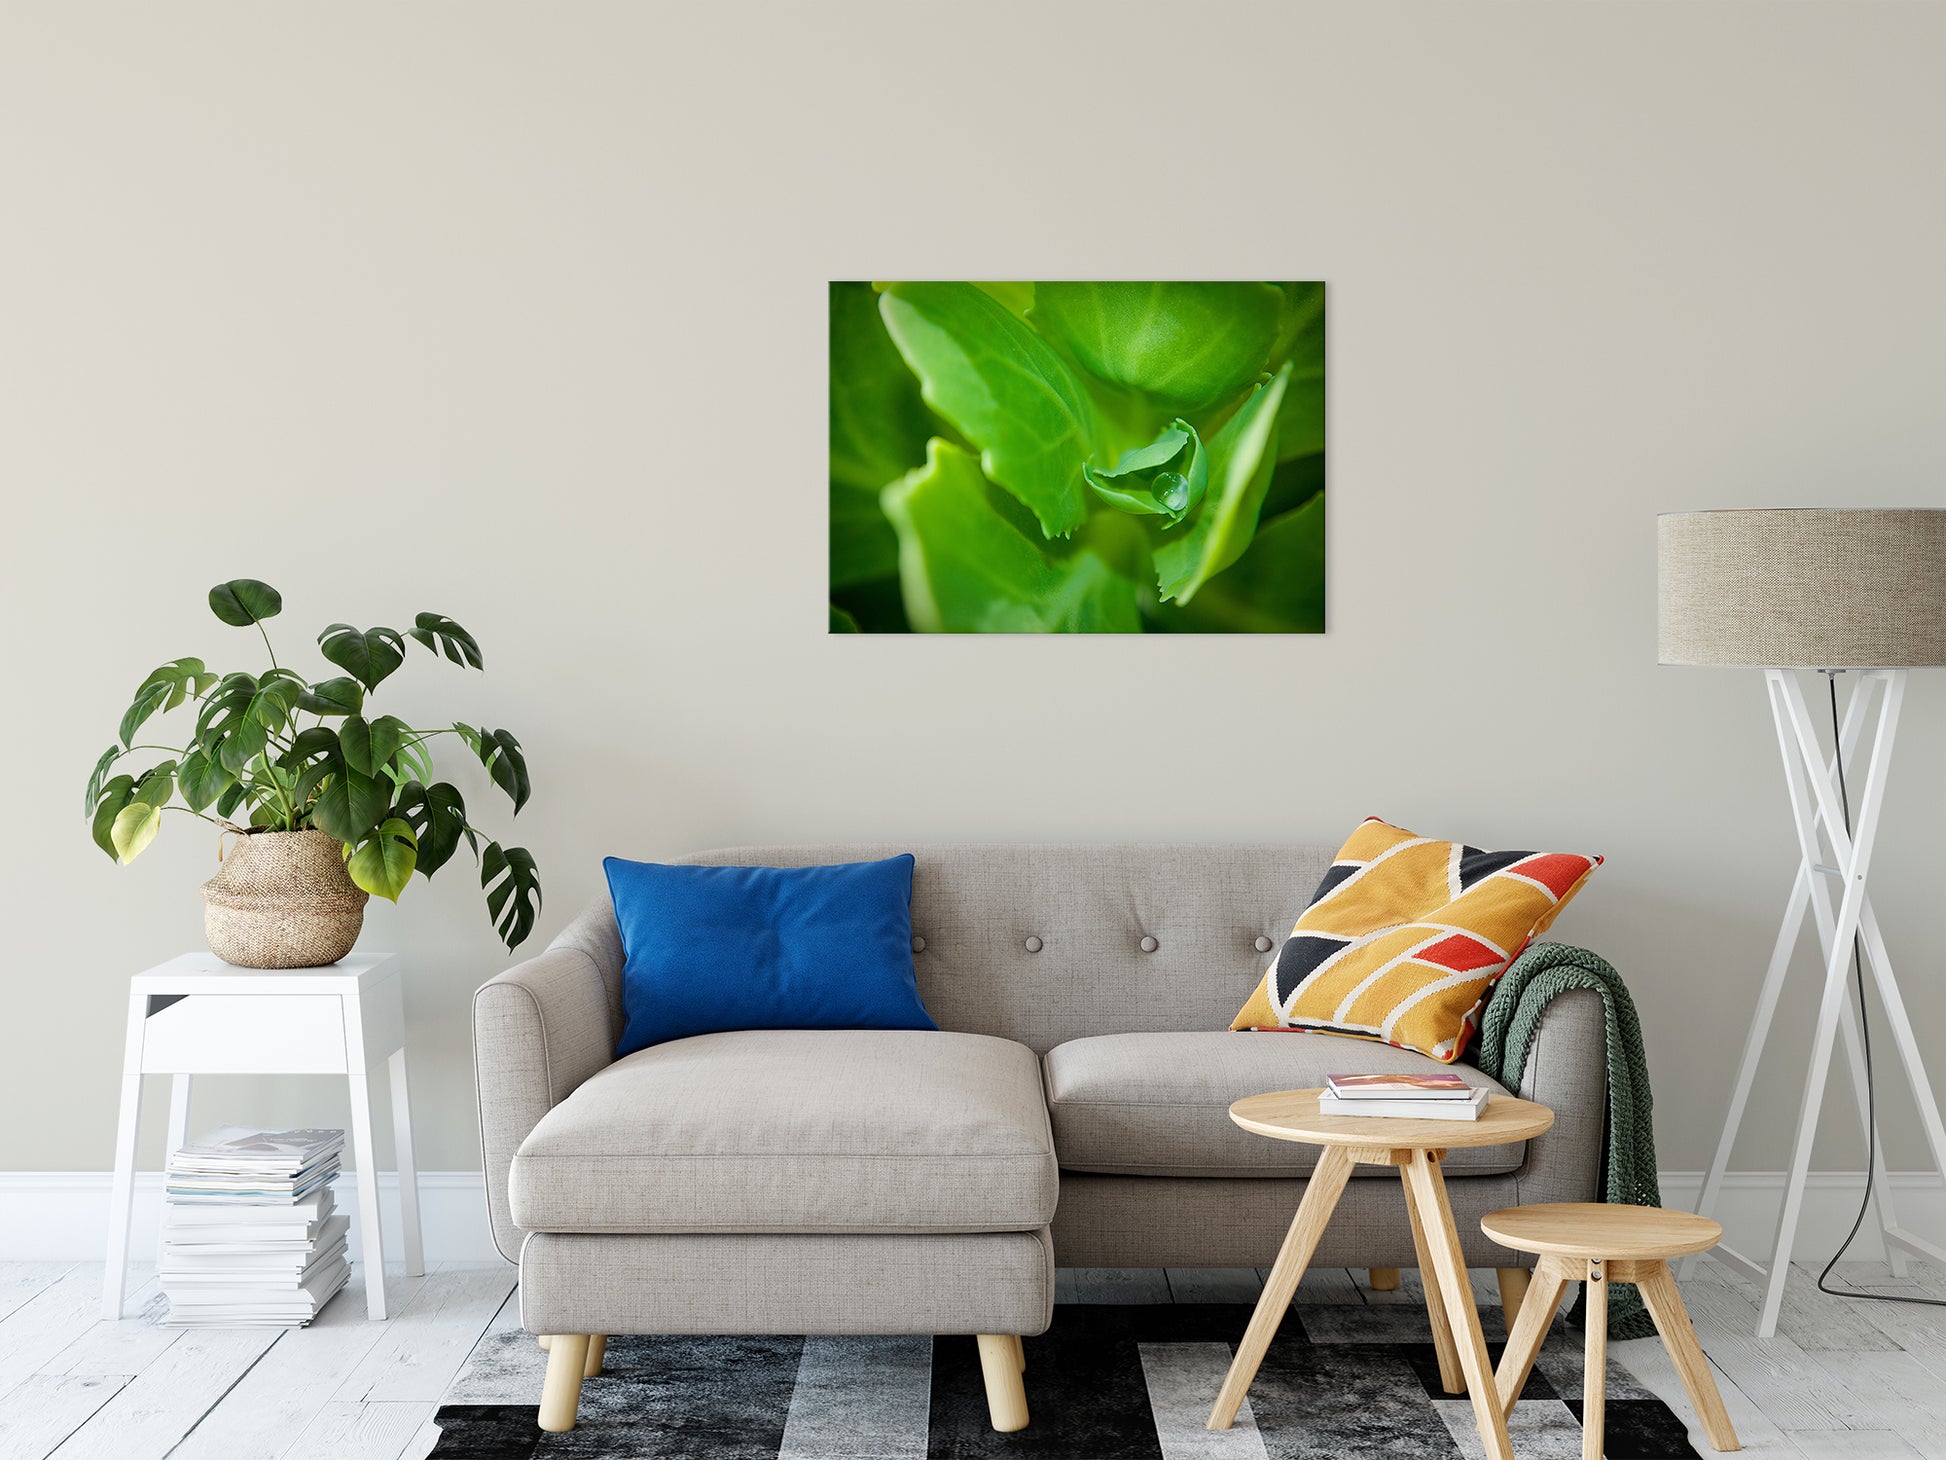 Cupped Droplet Botanical / Nature Photo Fine Art Canvas Wall Art Prints 24" x 36" - PIPAFINEART